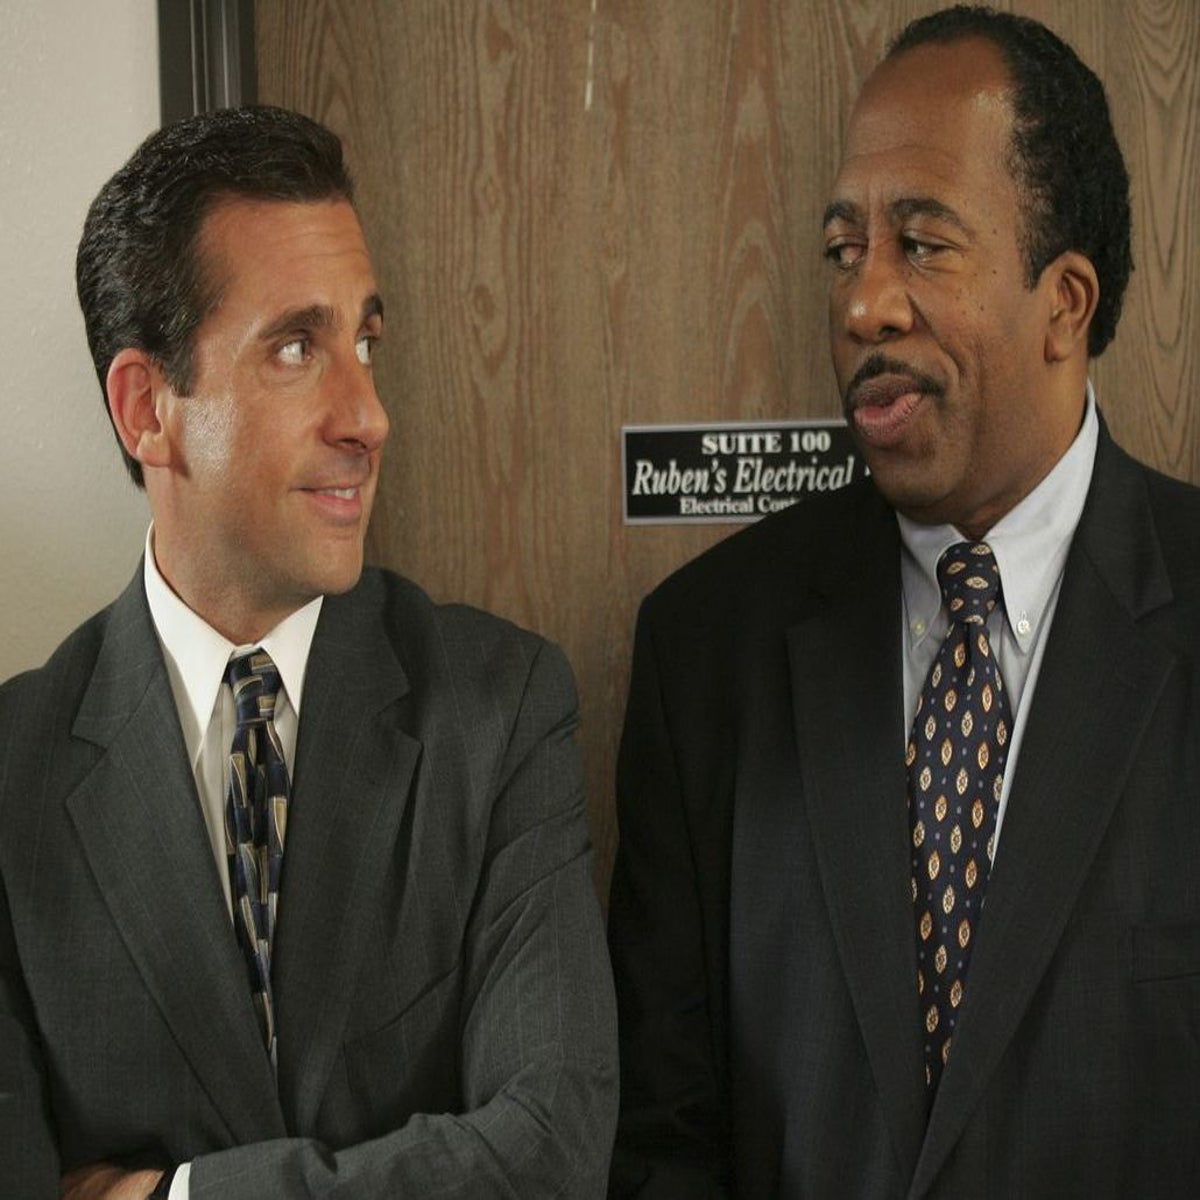 https://static.independent.co.uk/s3fs-public/thumbnails/image/2020/08/12/10/the-office-stanley-michael.jpg?width=1200&height=1200&fit=crop